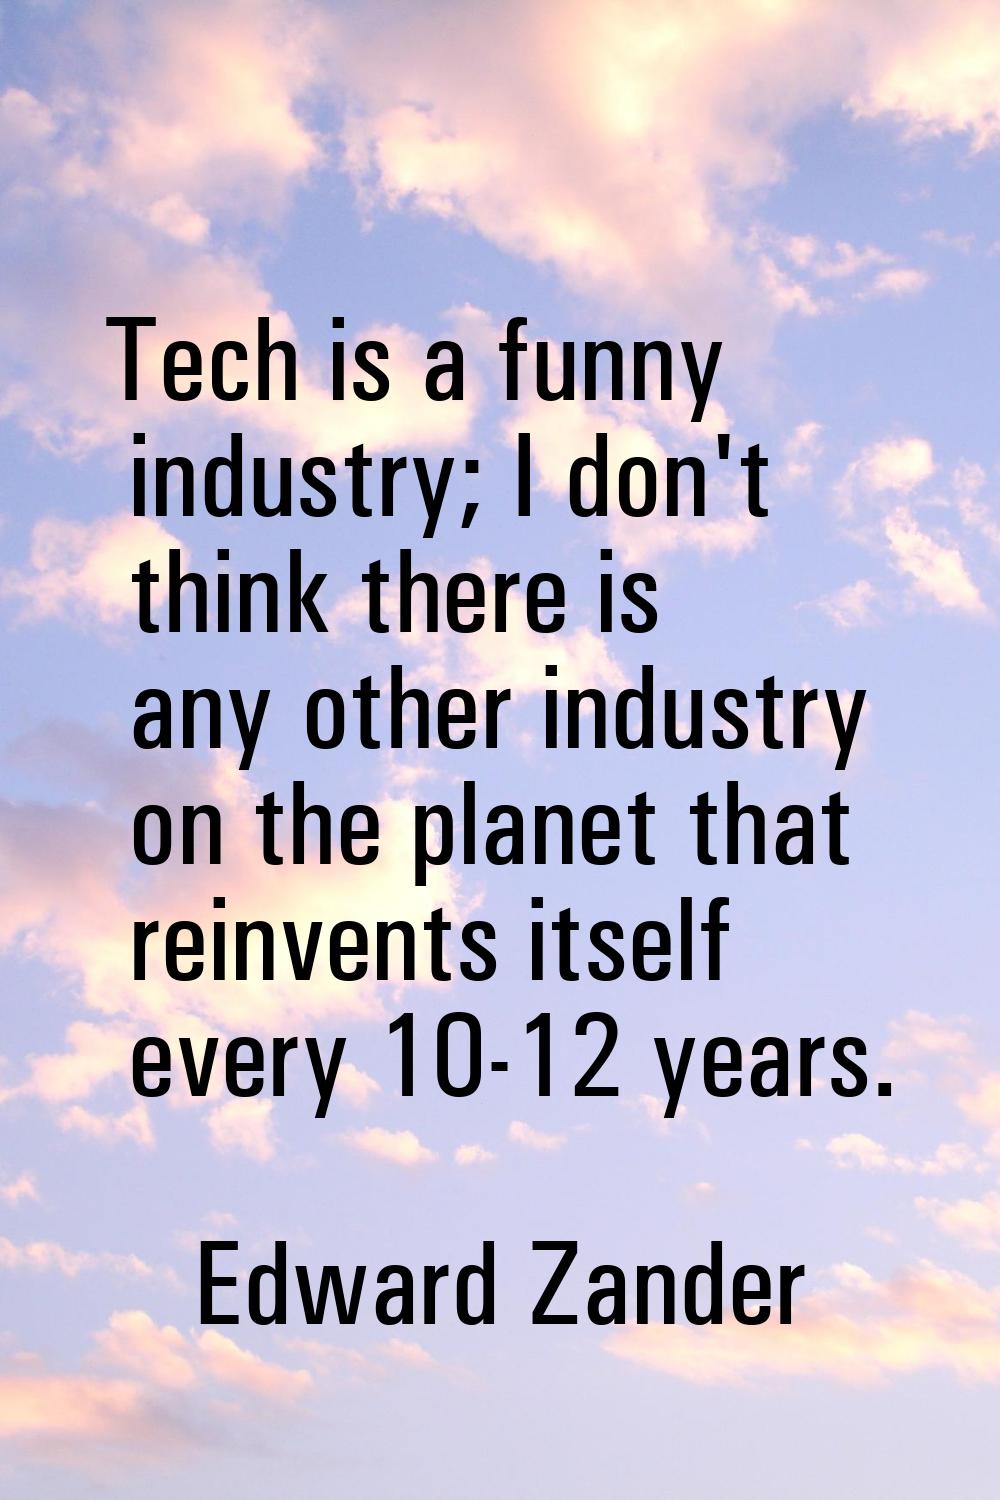 Tech is a funny industry; I don't think there is any other industry on the planet that reinvents it